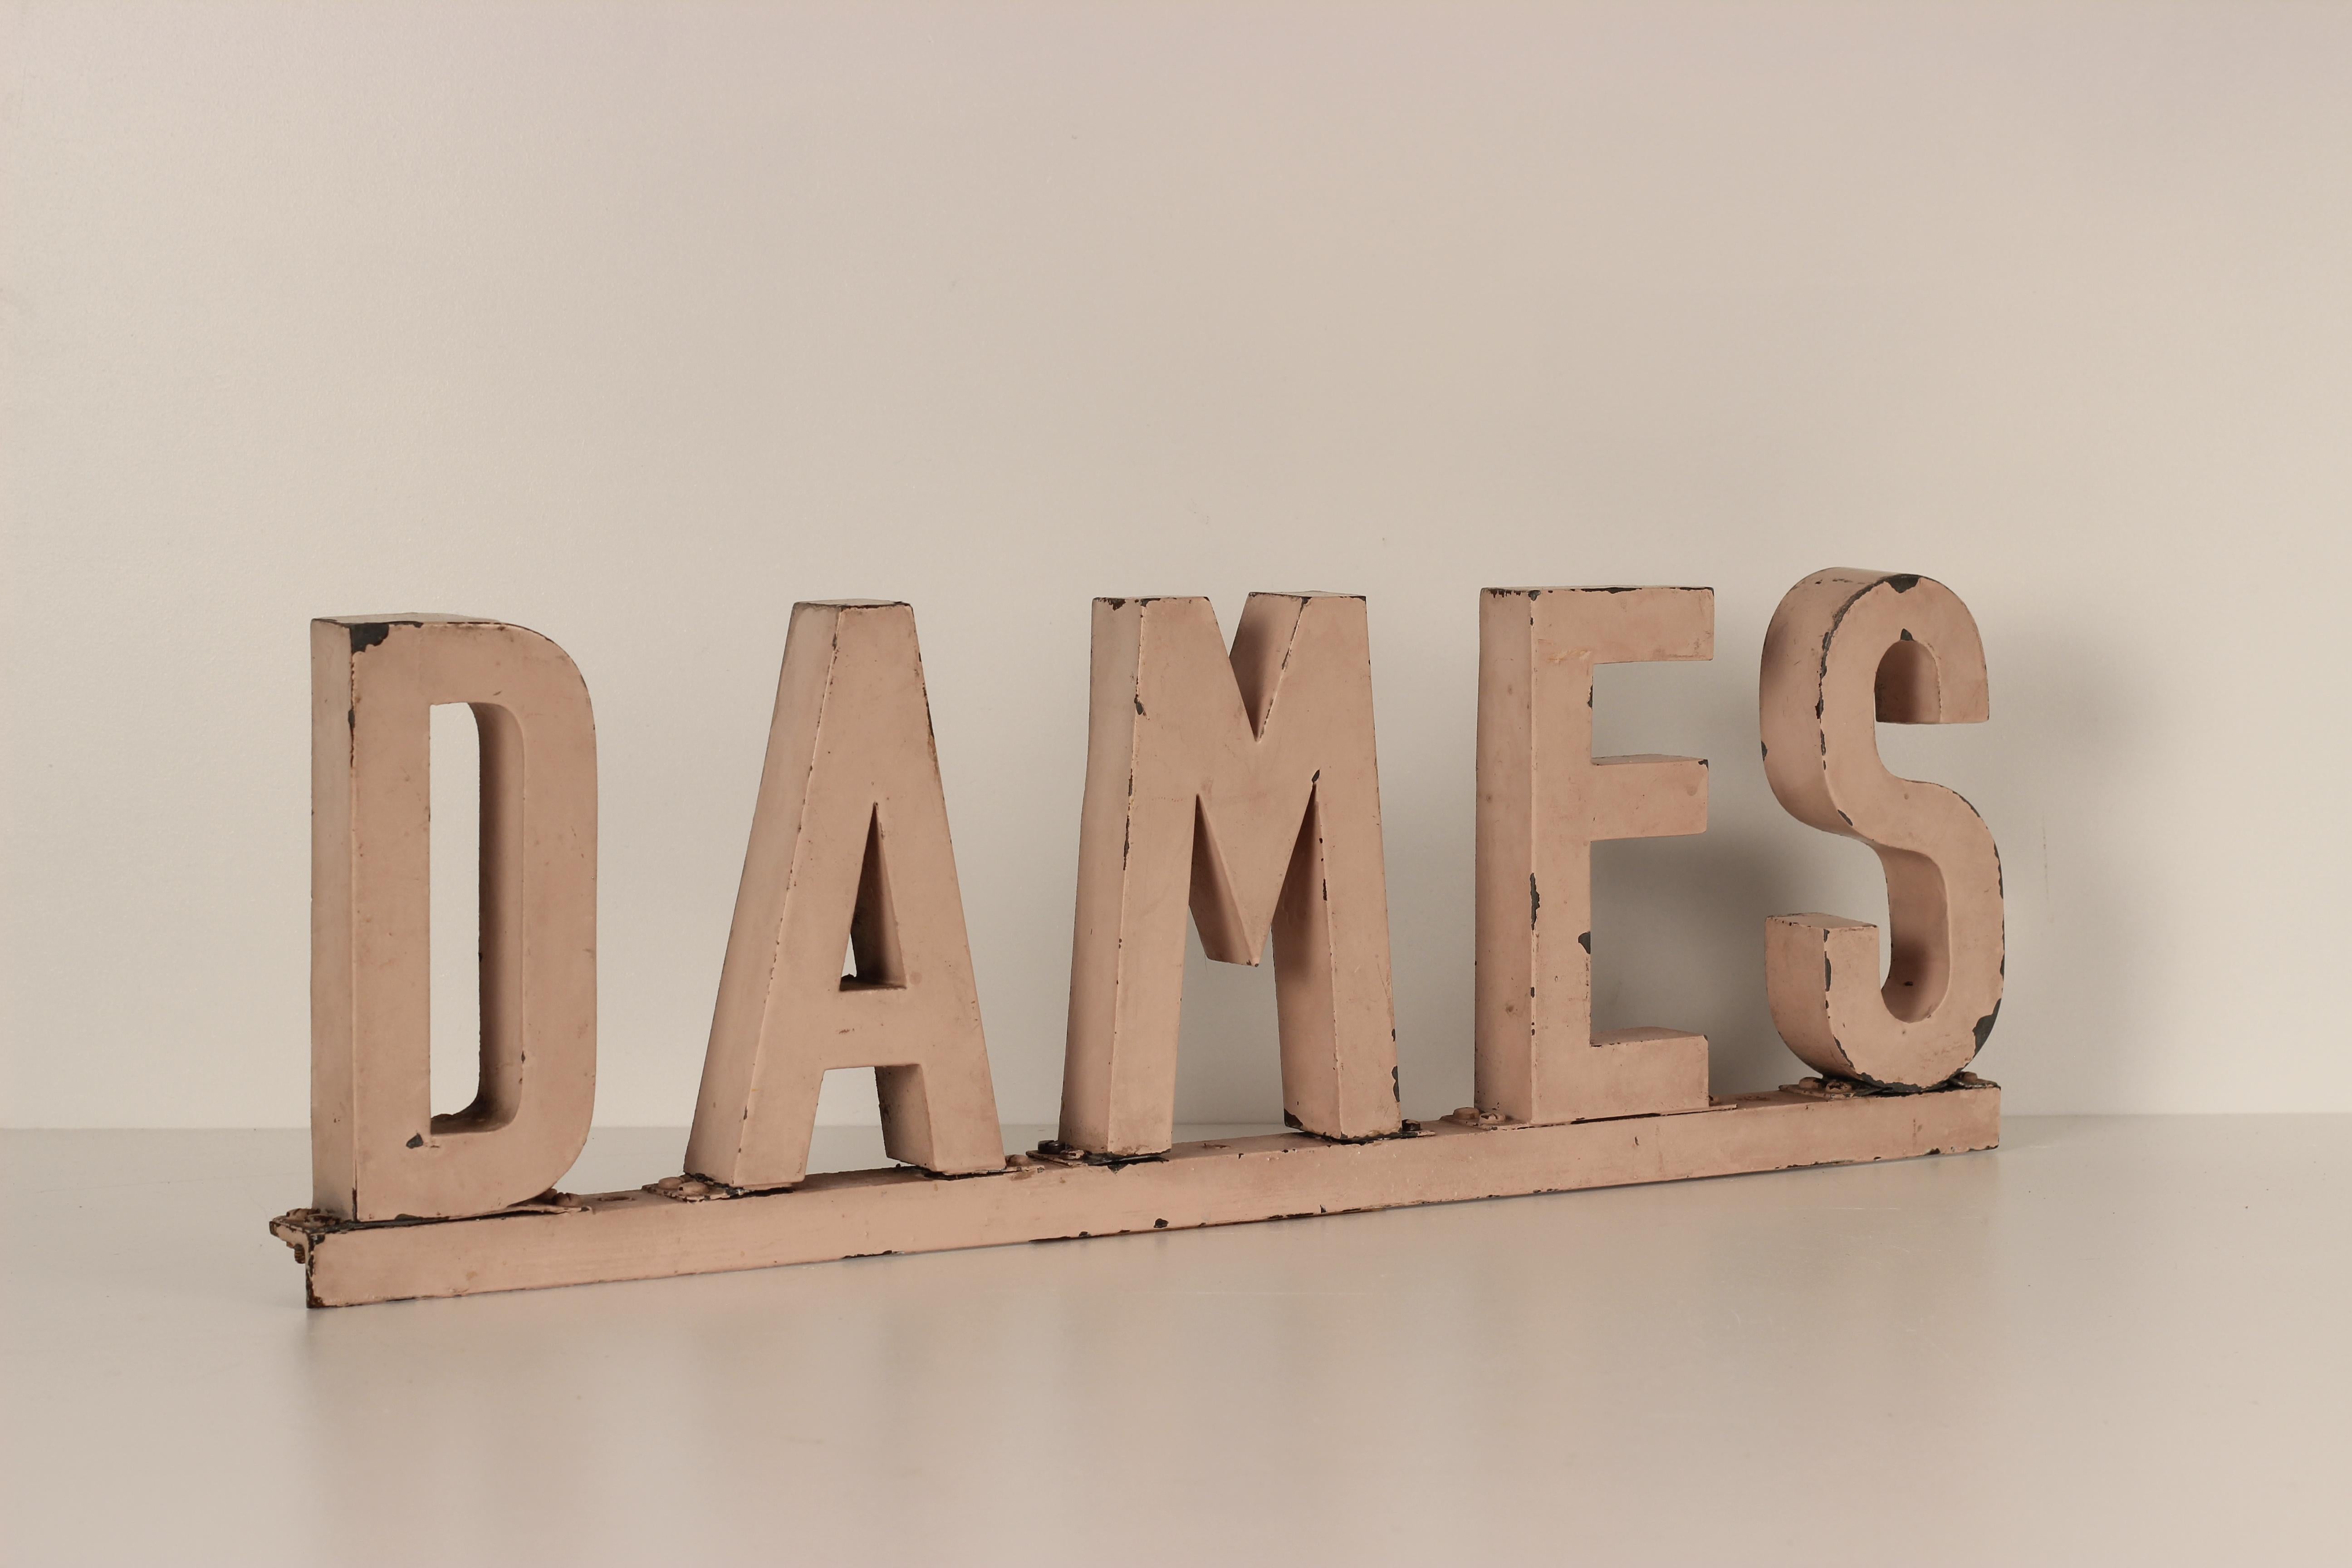 A French Mid Century Modern Swimming Pool changing room sign for a Lady or Ladies. The 3 dimensional letters made from metal box cut and riveted and welded on to a base plate in Original painted finish spell the word ‘Dame’.

General note: Shipping